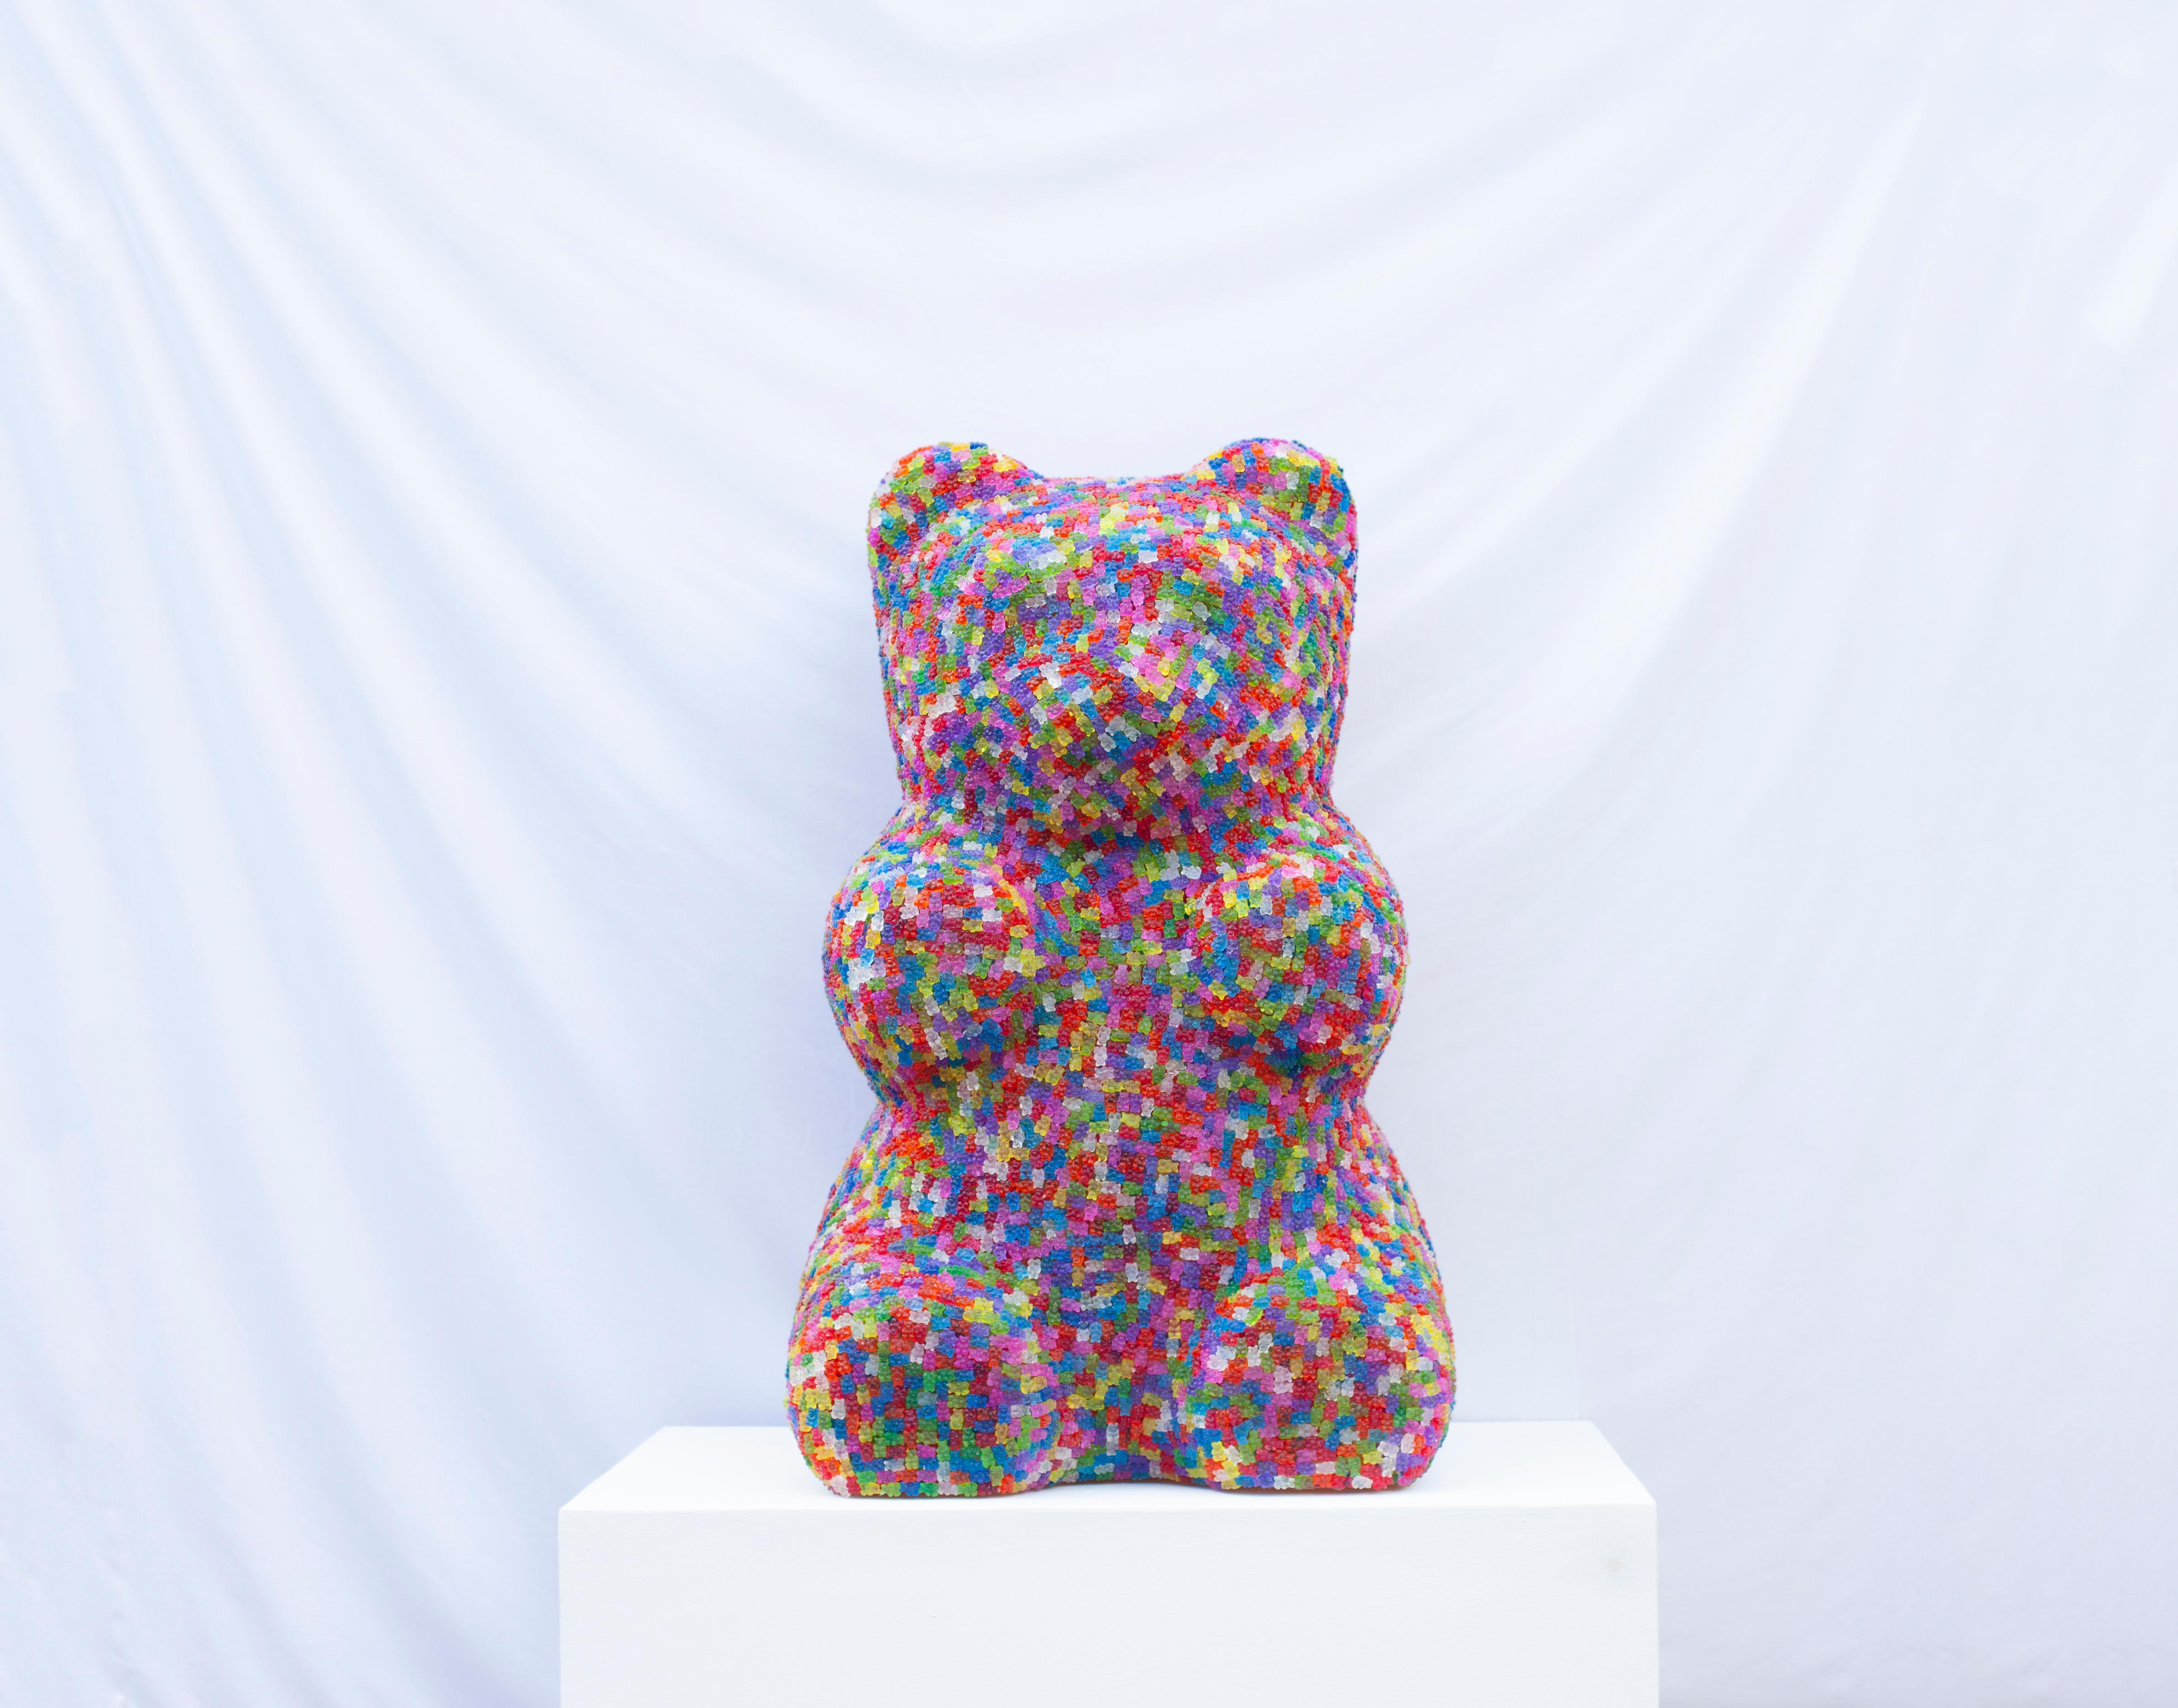 Kevin  Champeny Figurative Sculpture - Gummy Obsession